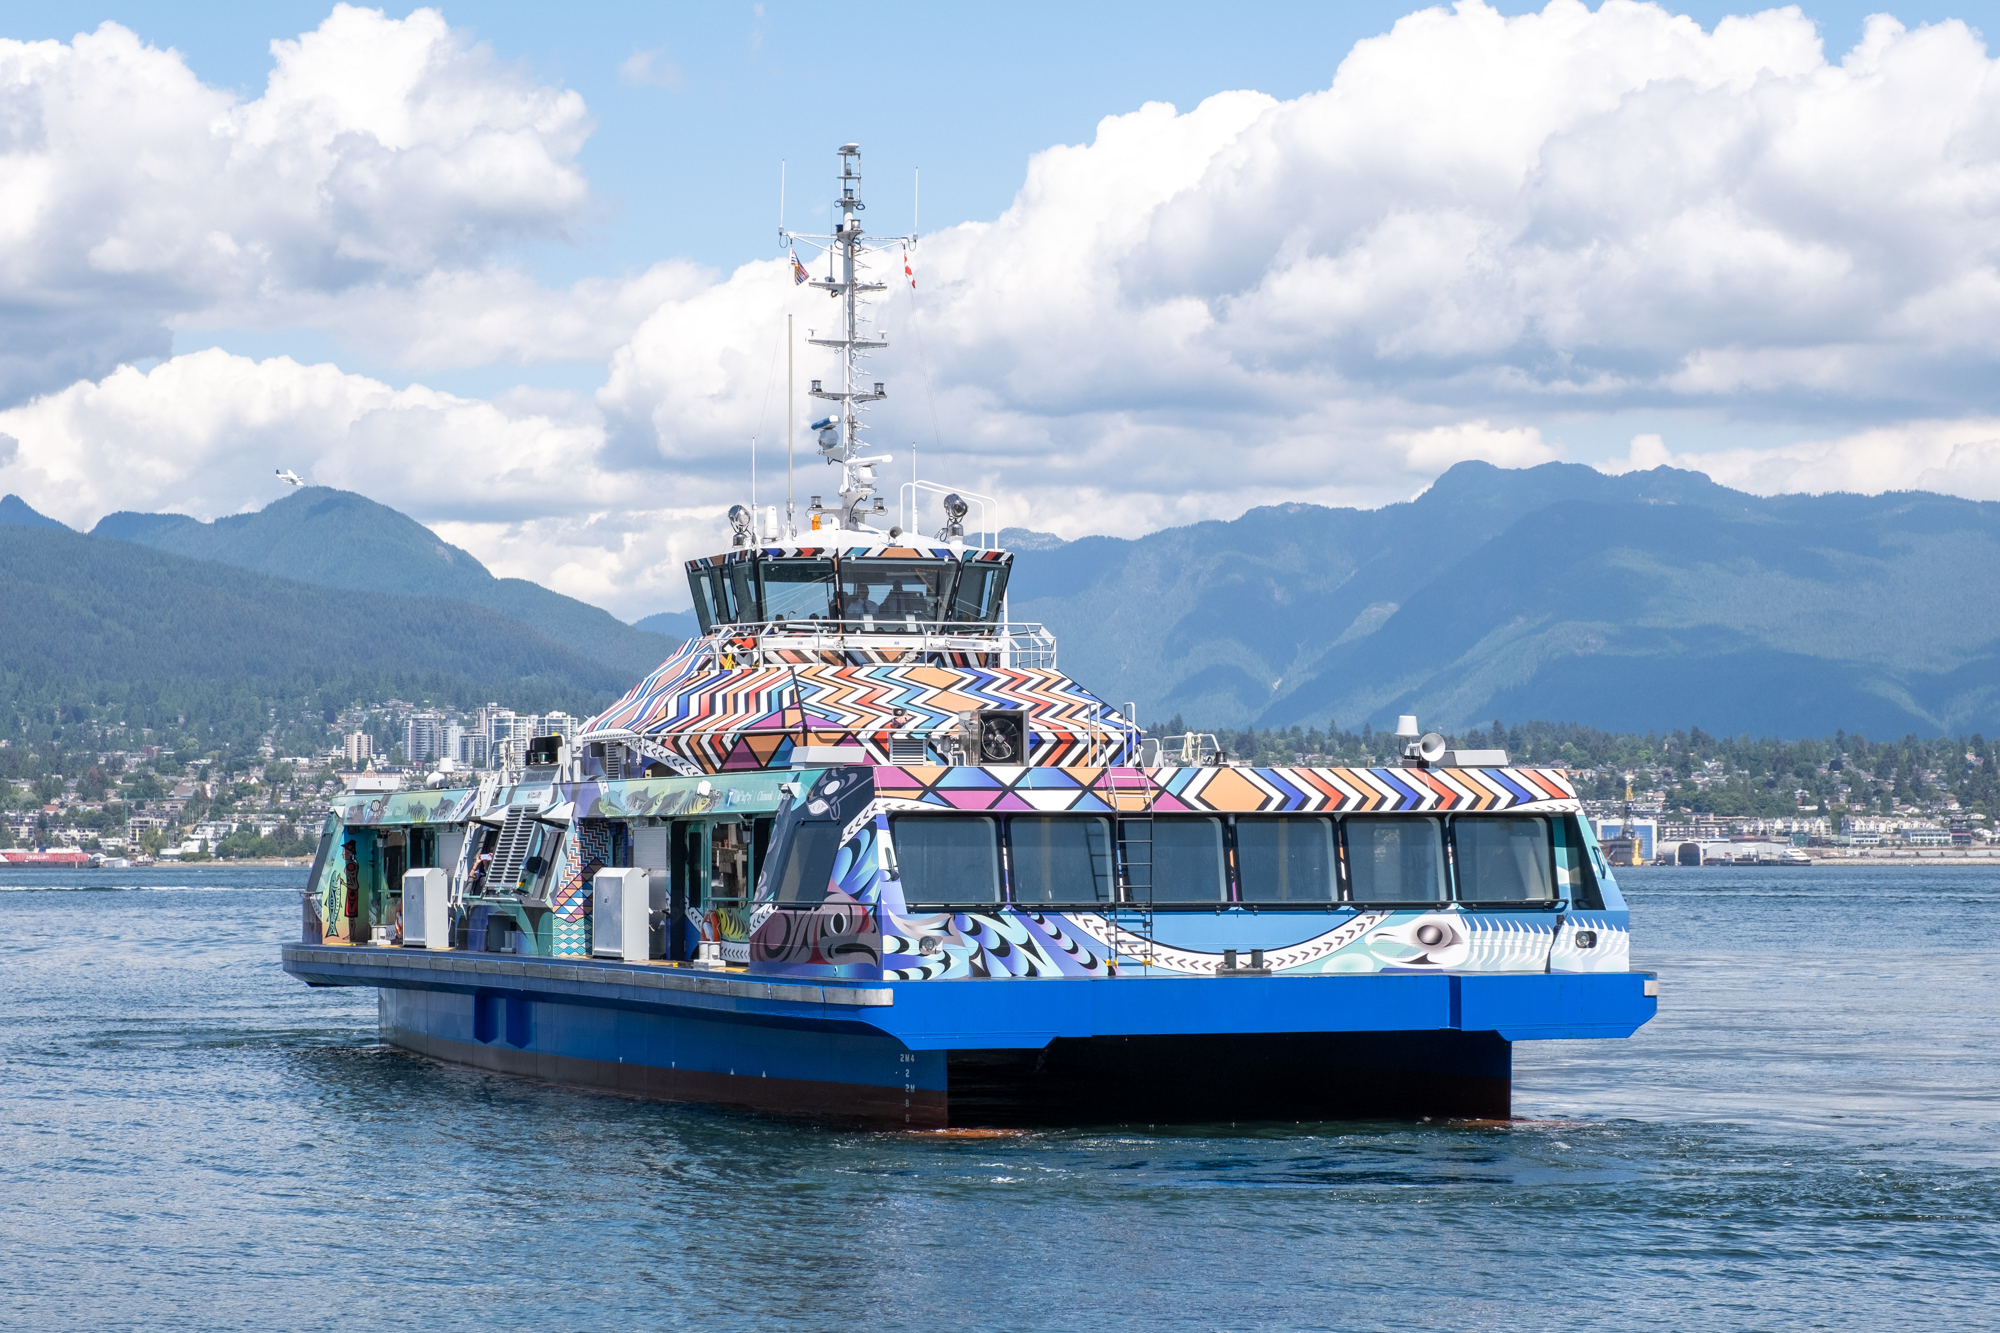 The colourful artwork of the Burrard Chinook as the vessel sails in the water